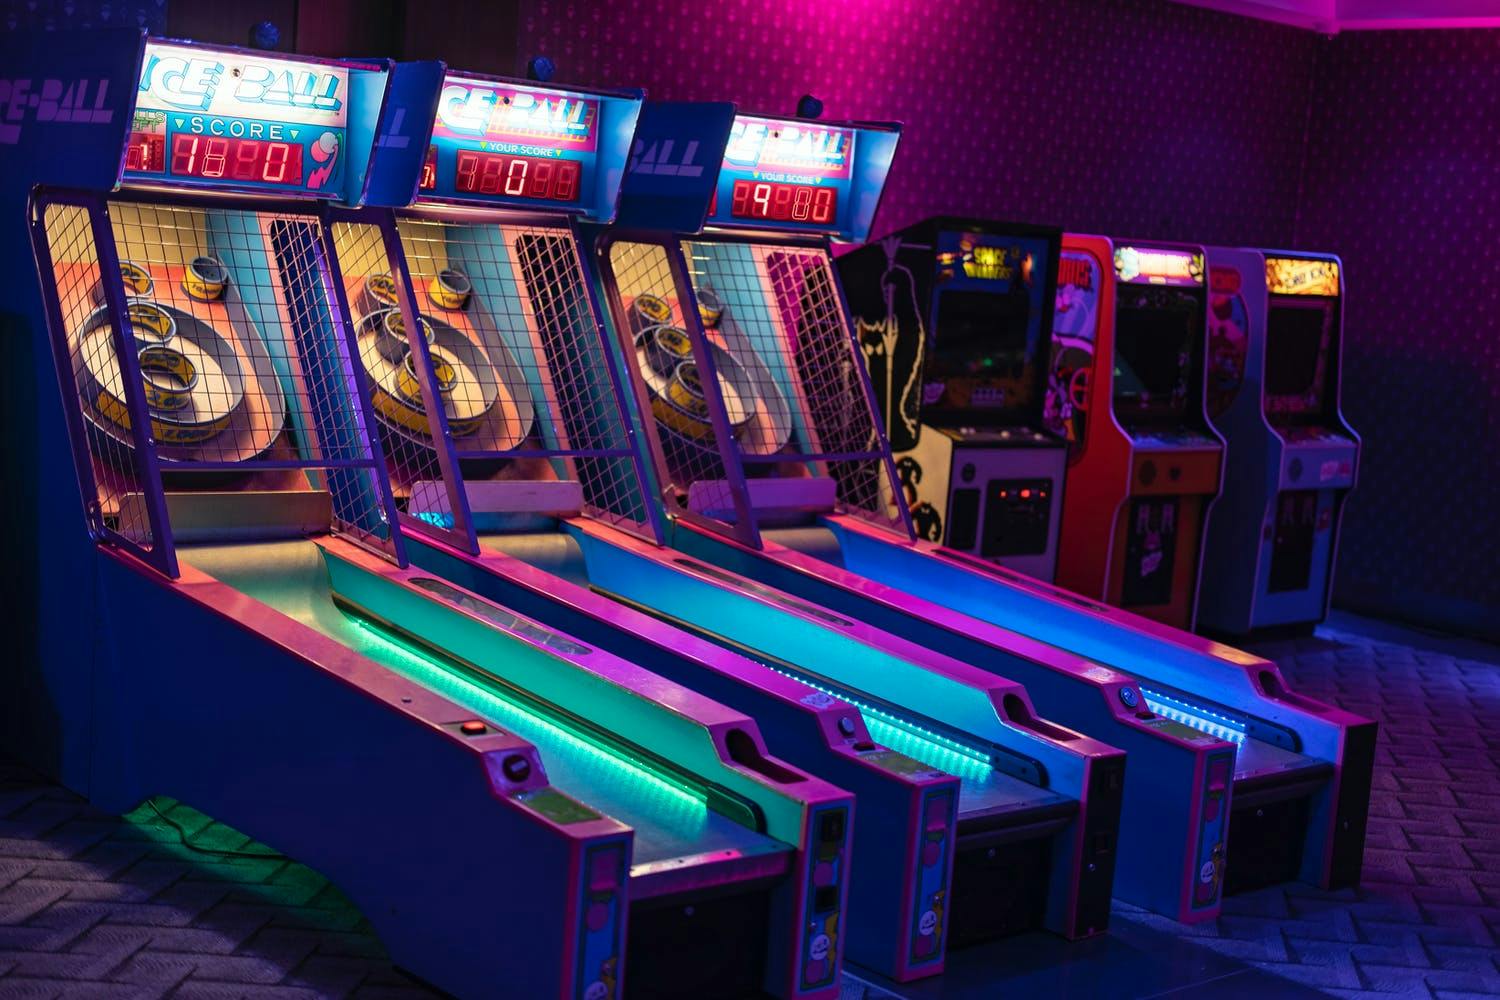 Neon skee ball arcade games at throwback 80s-themed corporate event | PartySlate